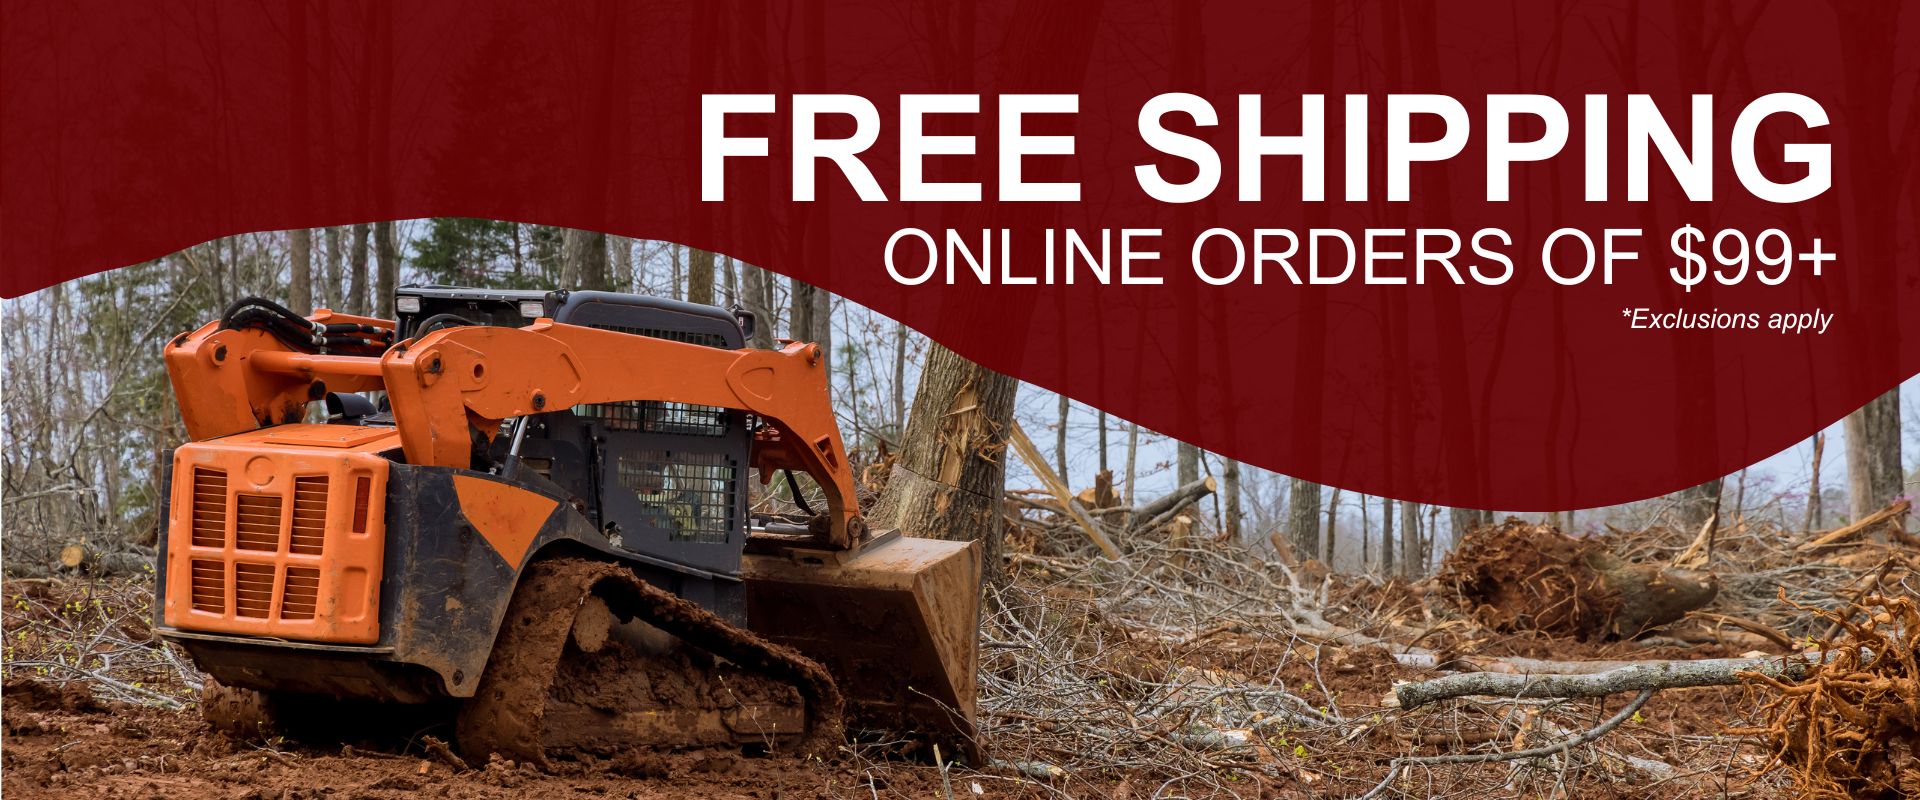 Free Shipping on orders of $99+ placed online